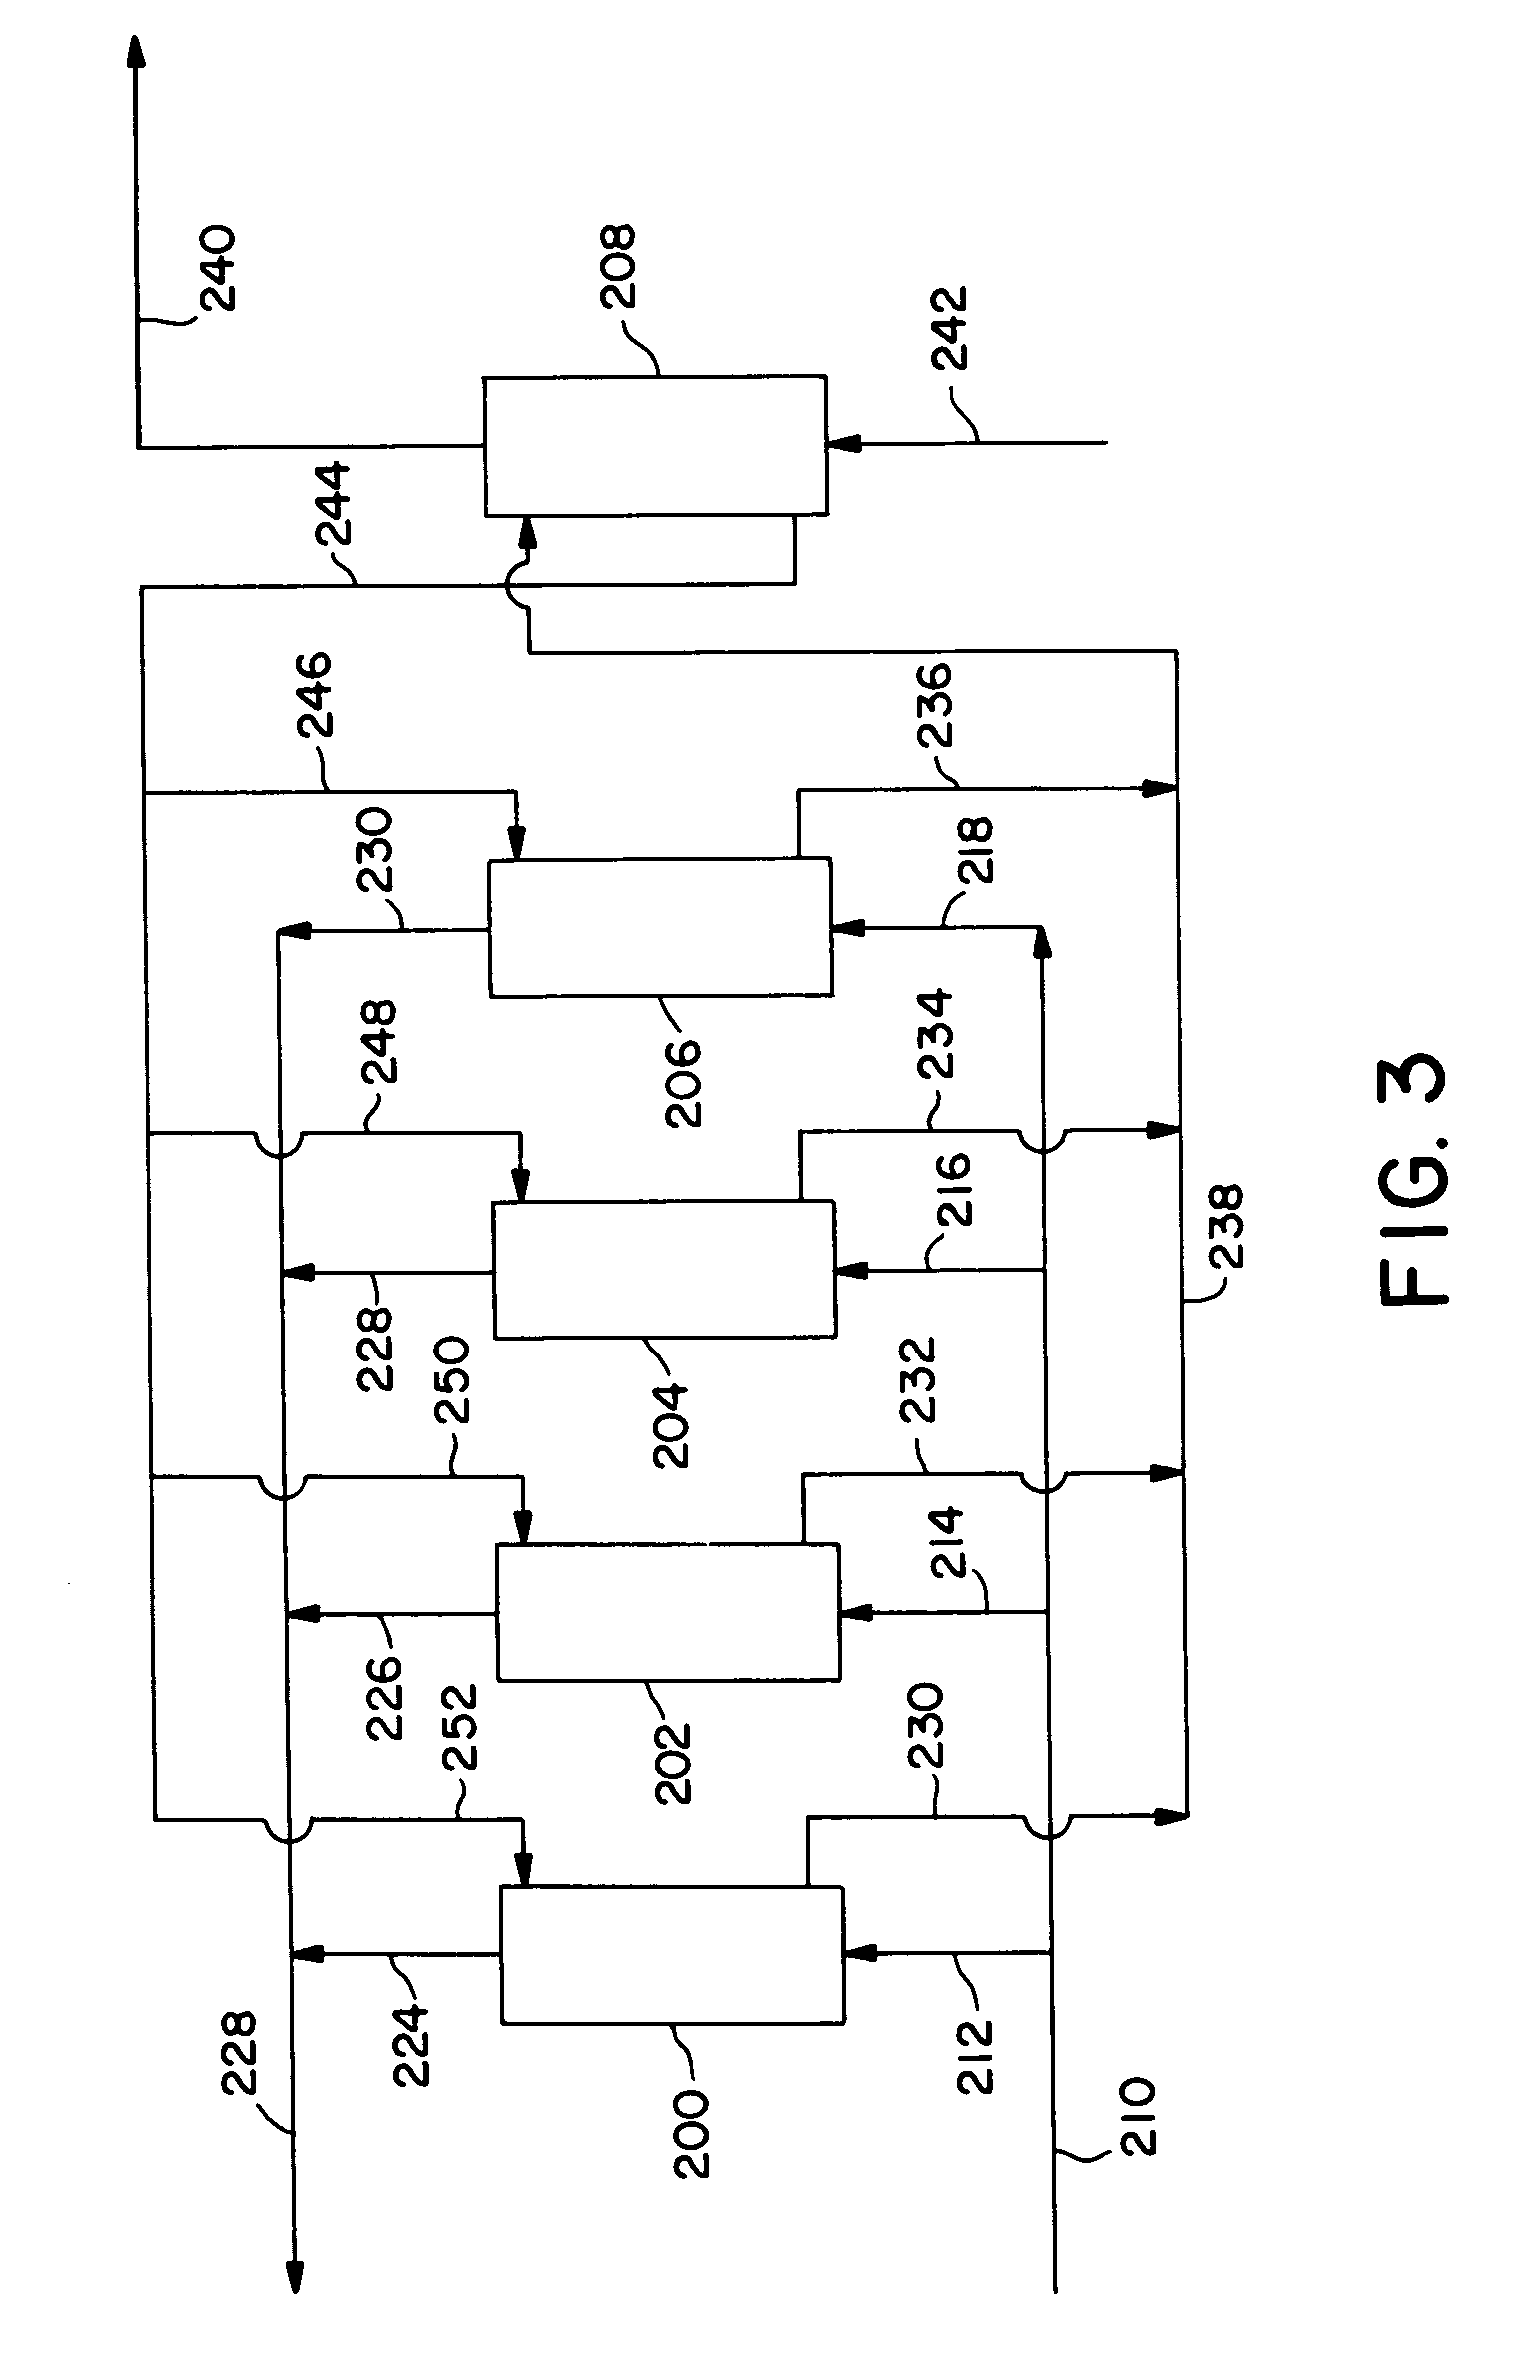 System and method for liquefying variable selected quantities of light hydrocarbon gas with a plurality of light hydrocarbon gas liquefaction trains